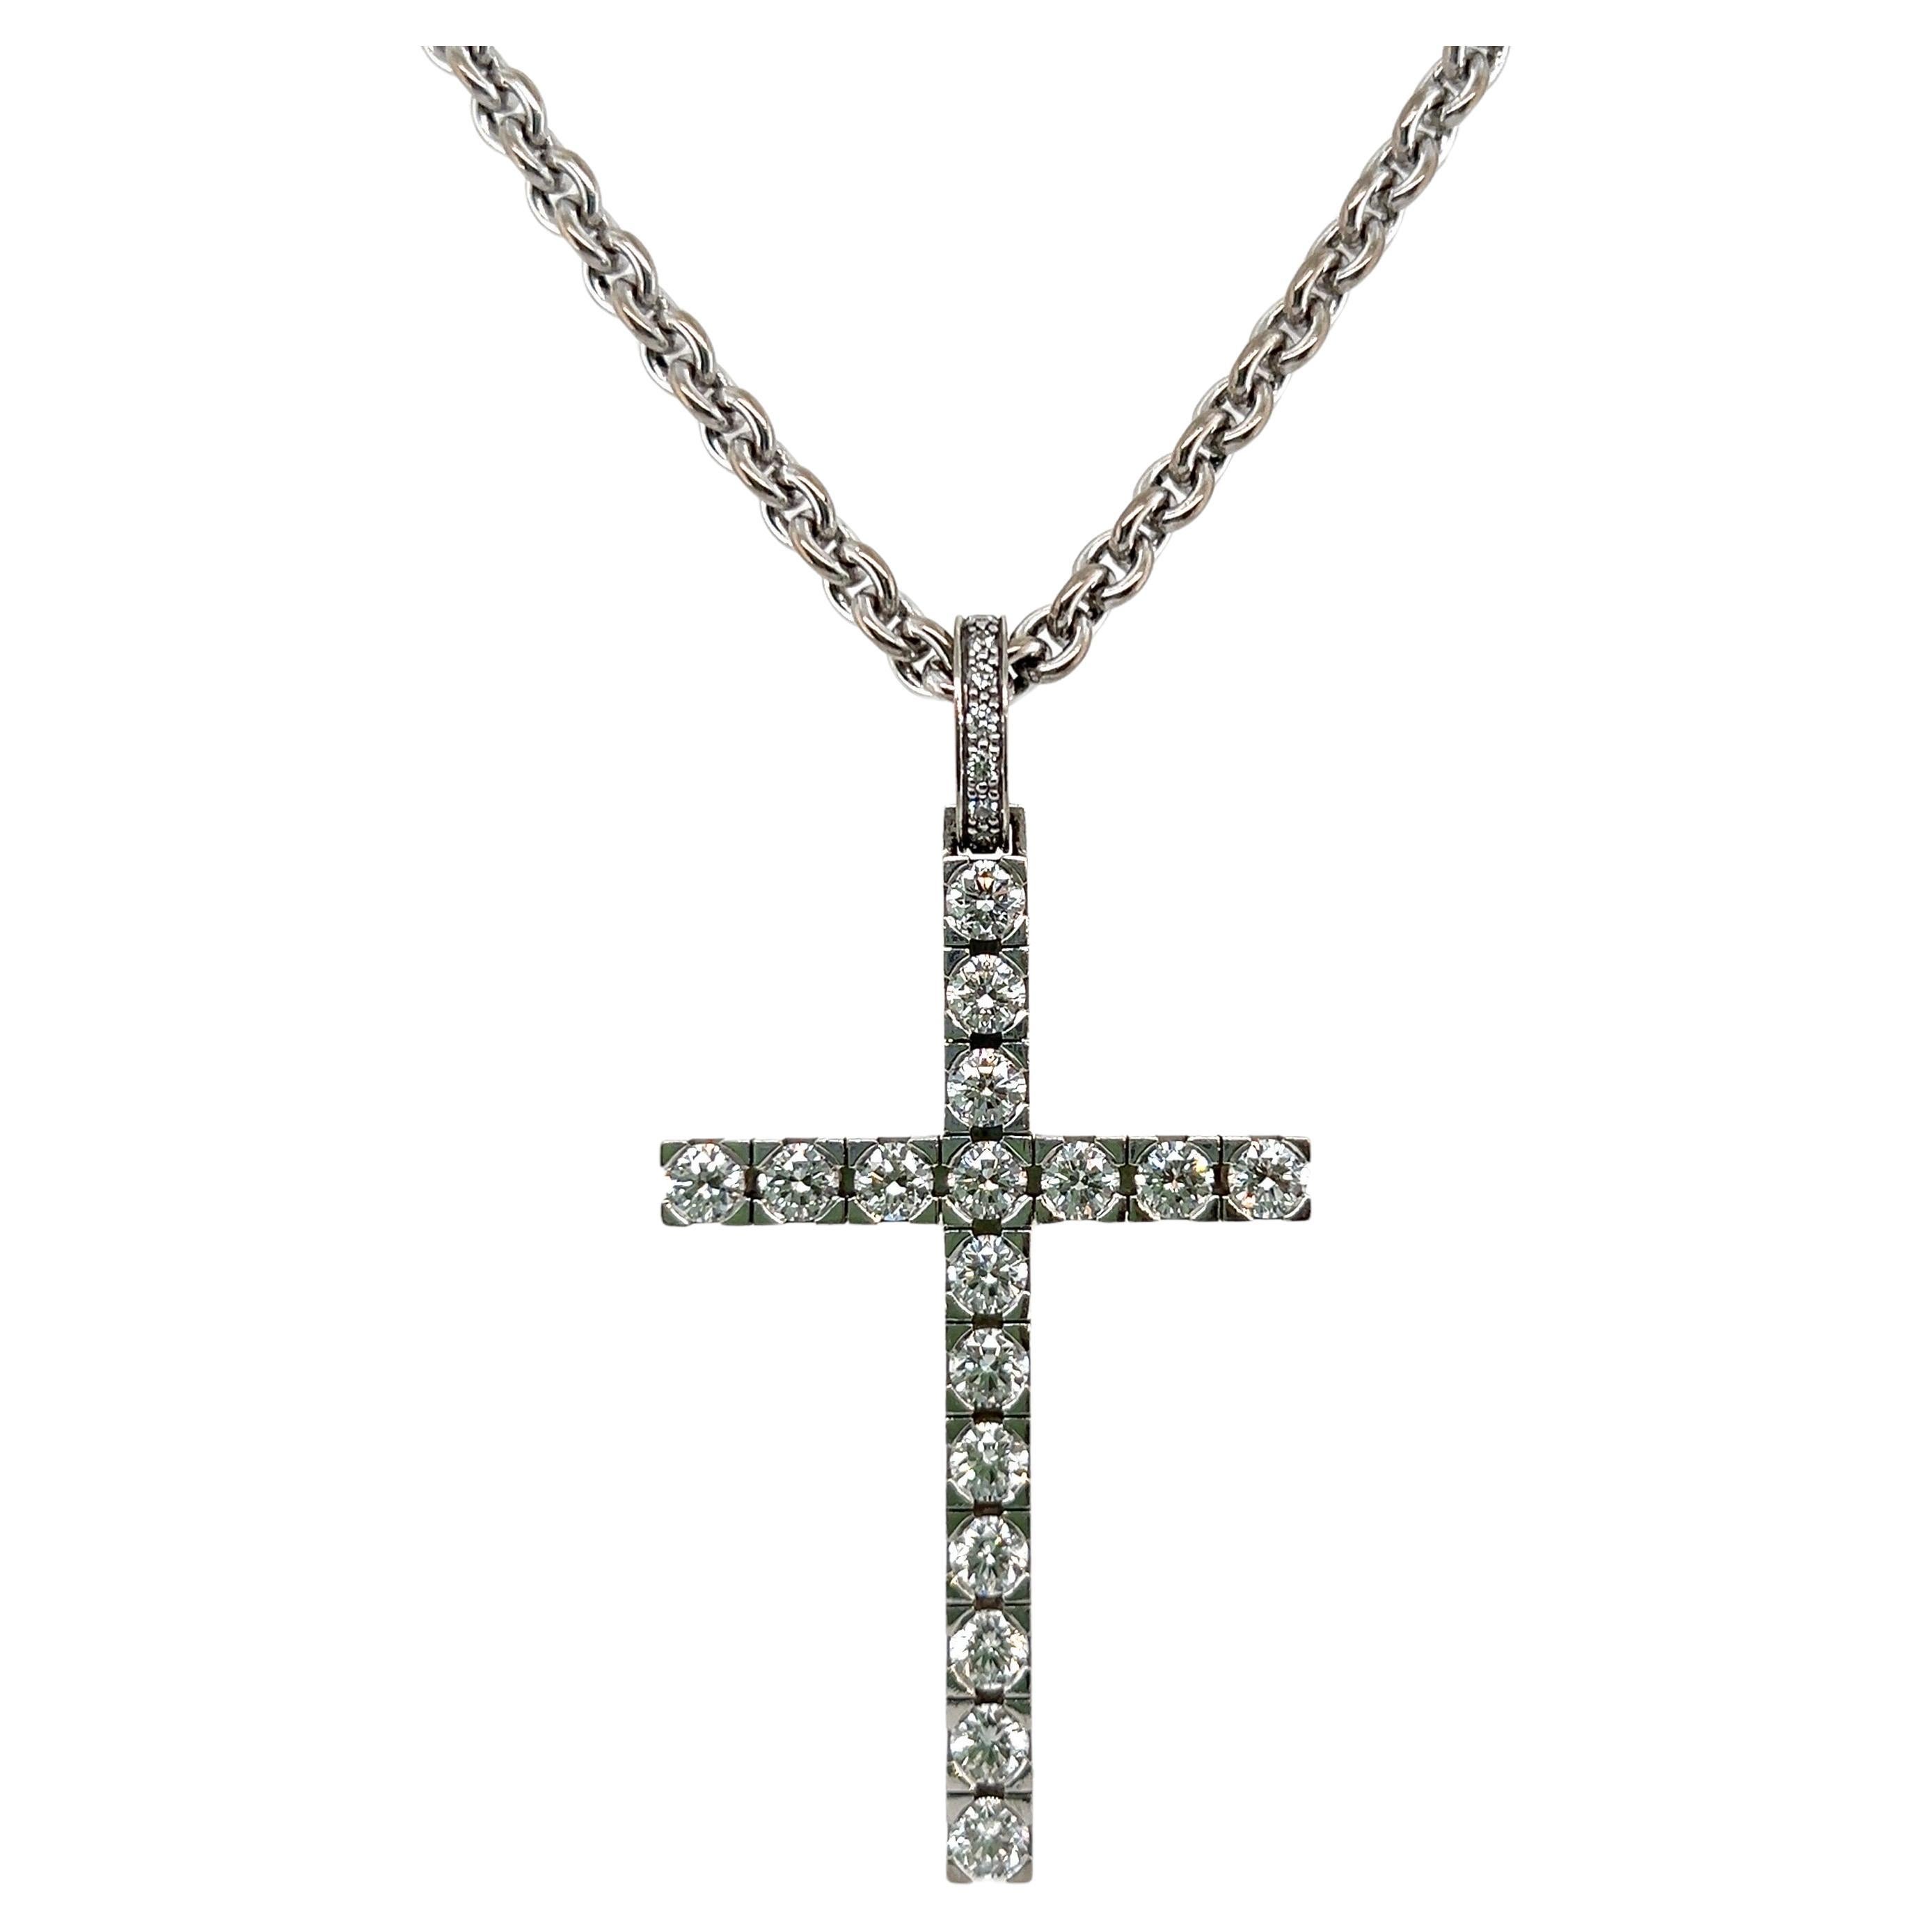 18 Karat White Gold and Diamond Cross Pendant with Chain by Meister